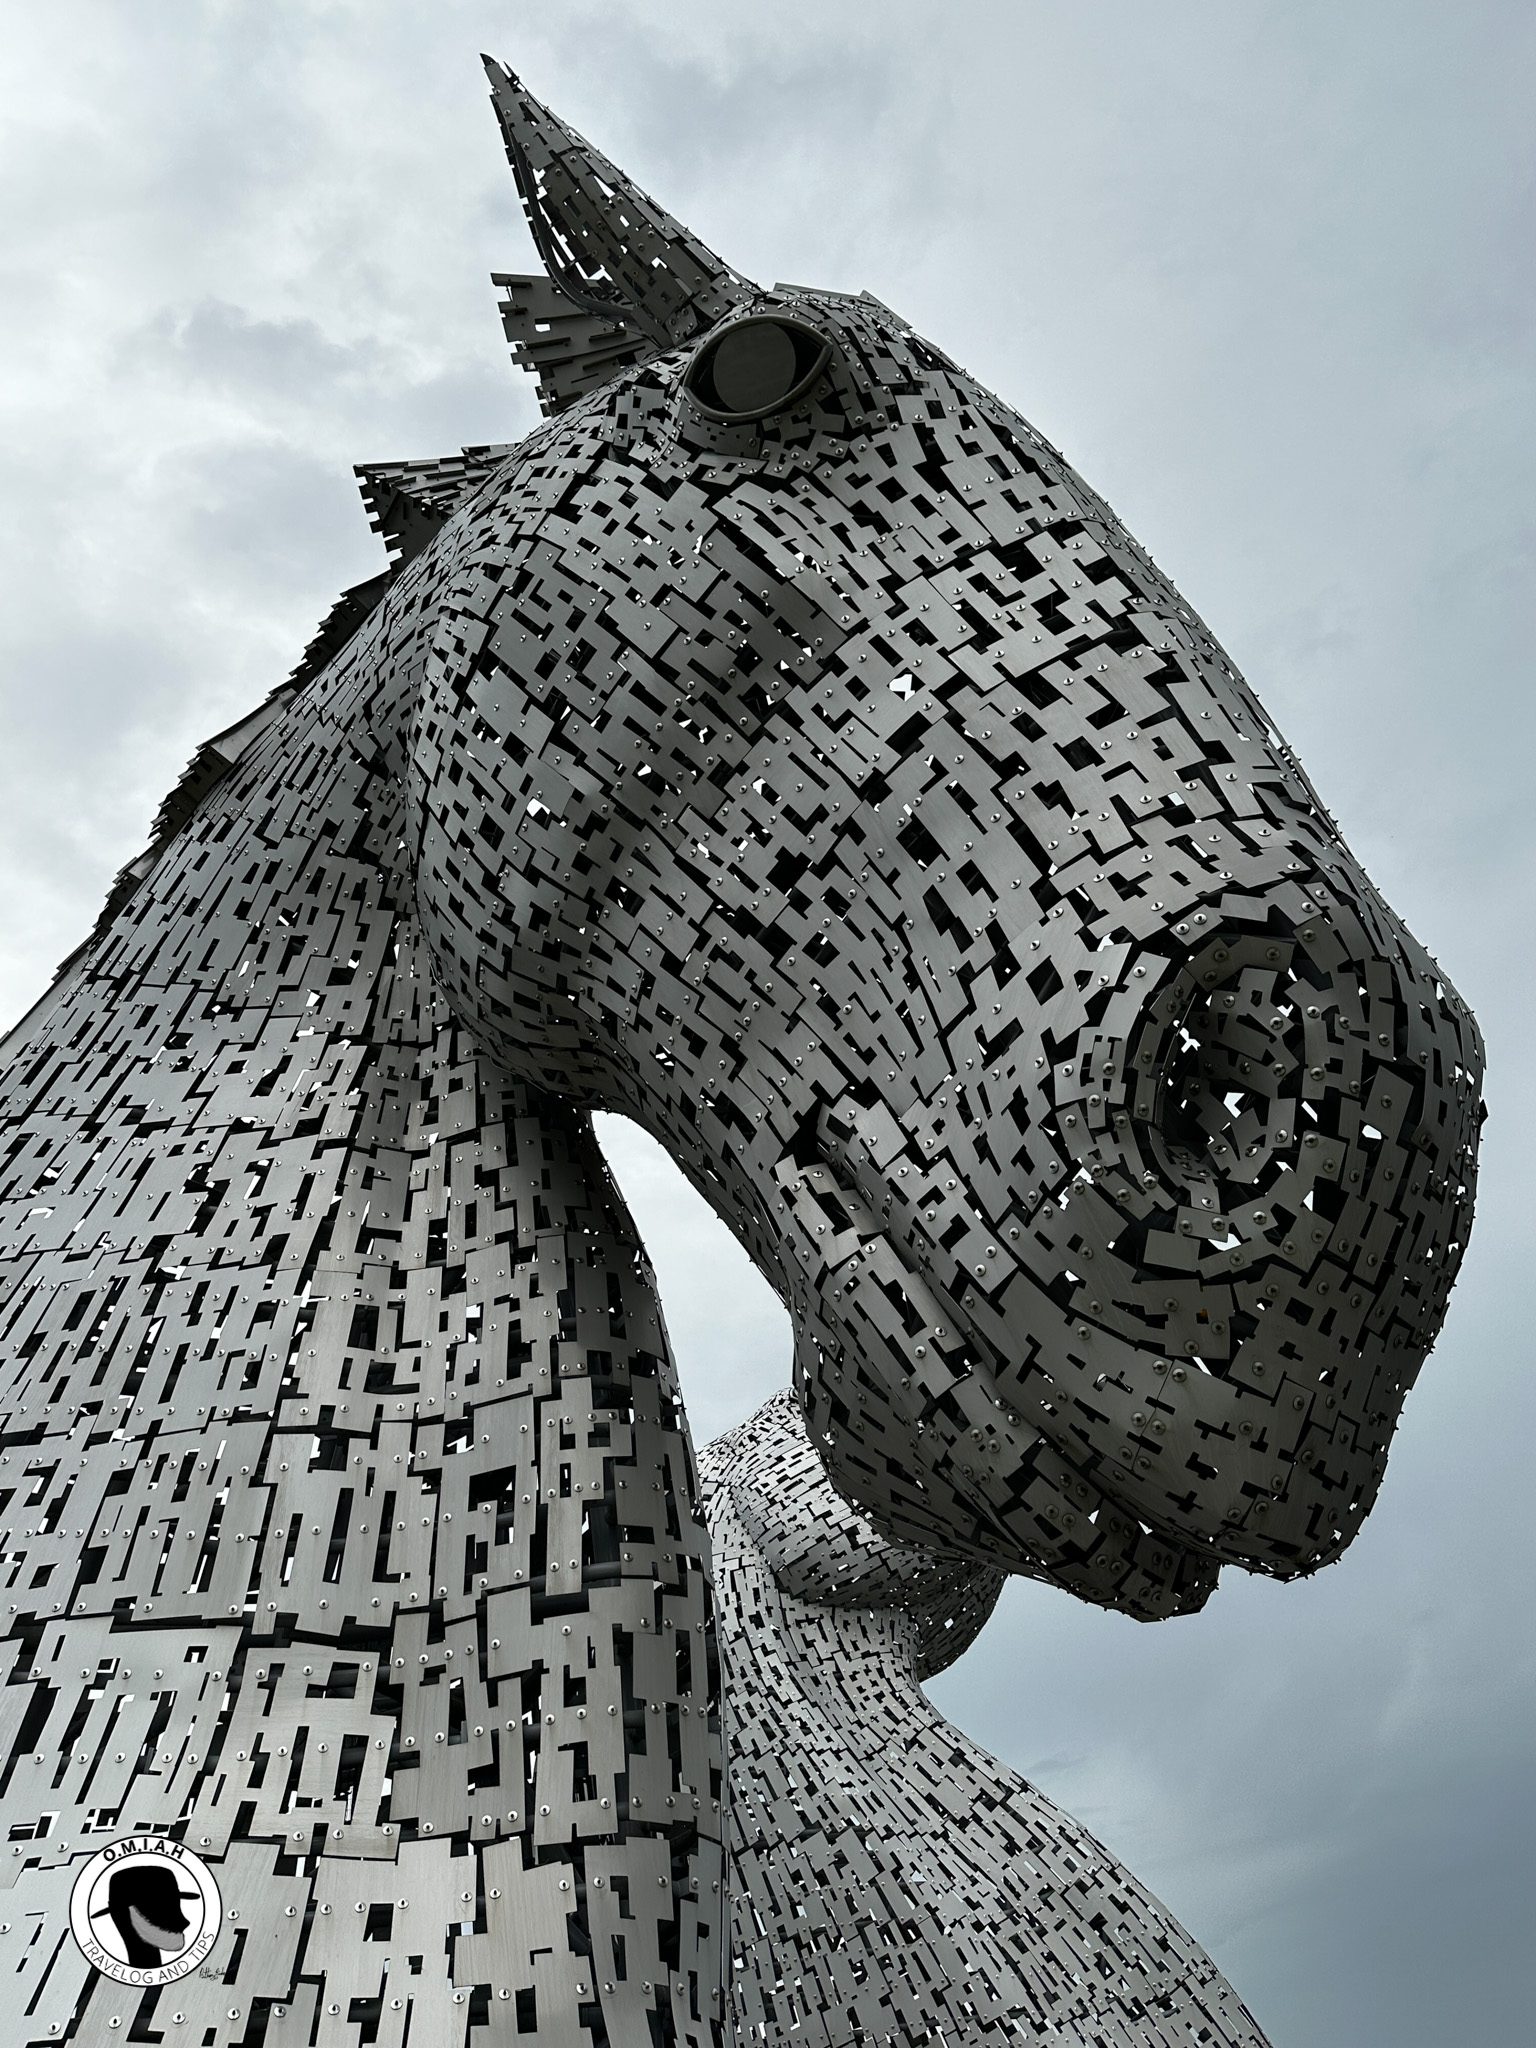 Stainless steel sculpture of horse heads called the Kelpies